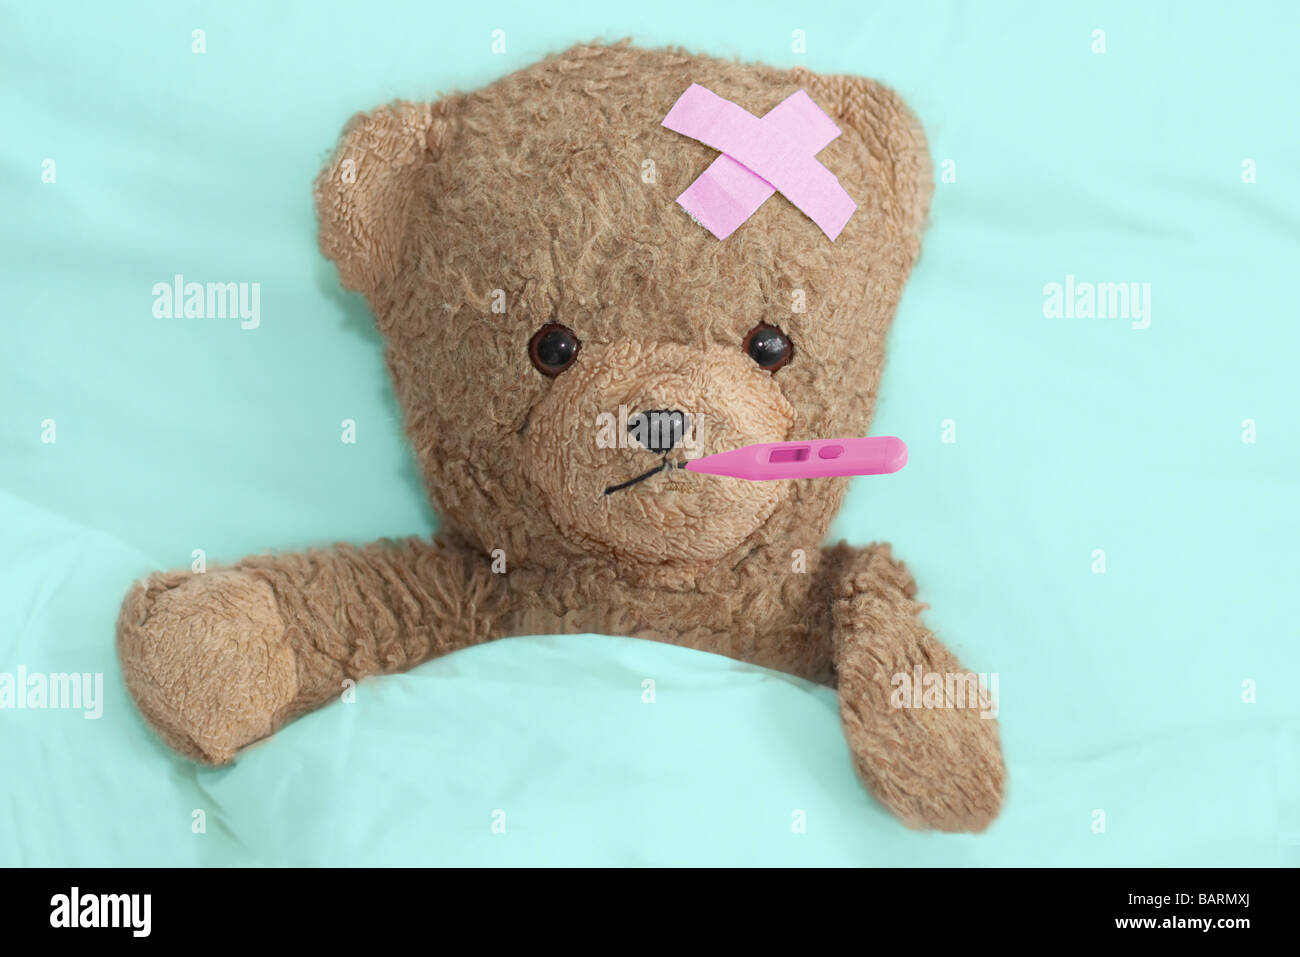 Cute get well message from teddy doctor Stock Photo - Alamy